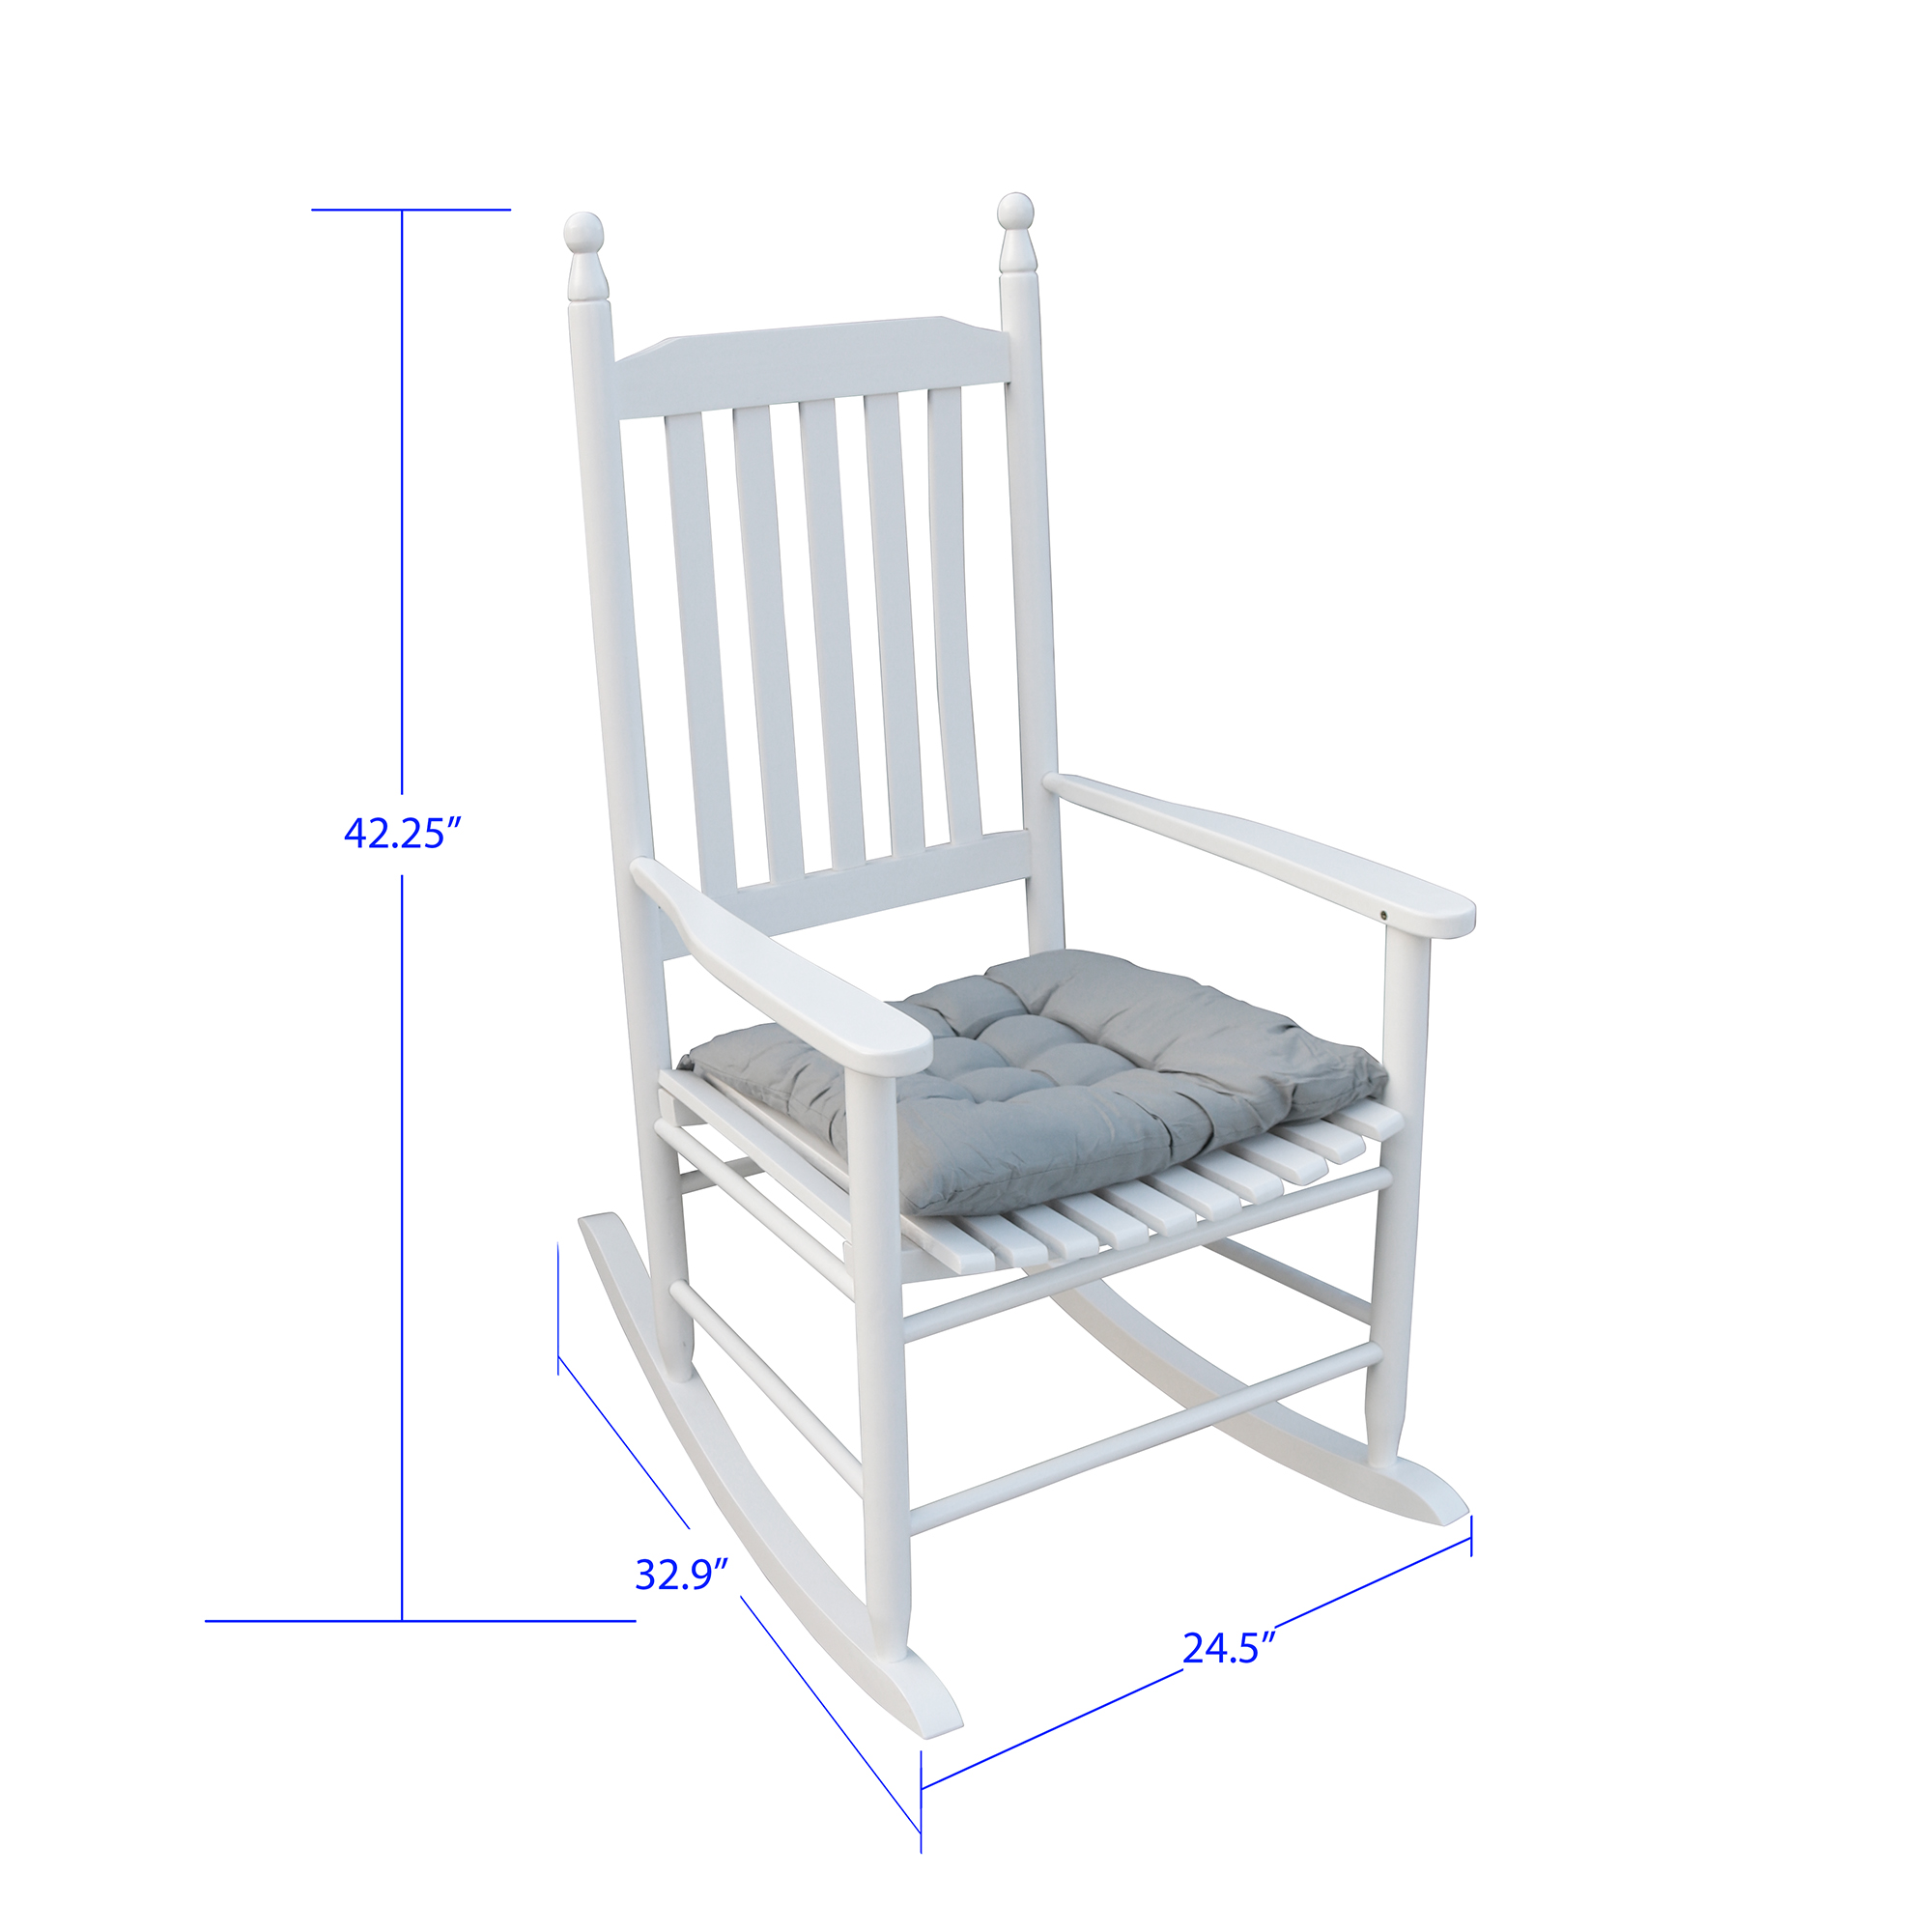 Outdoor Rocking Chair, Wood Rocker Chair for Porch Garden Patio, White24.5" L x 32.85" W x 45.3" H - image 2 of 7